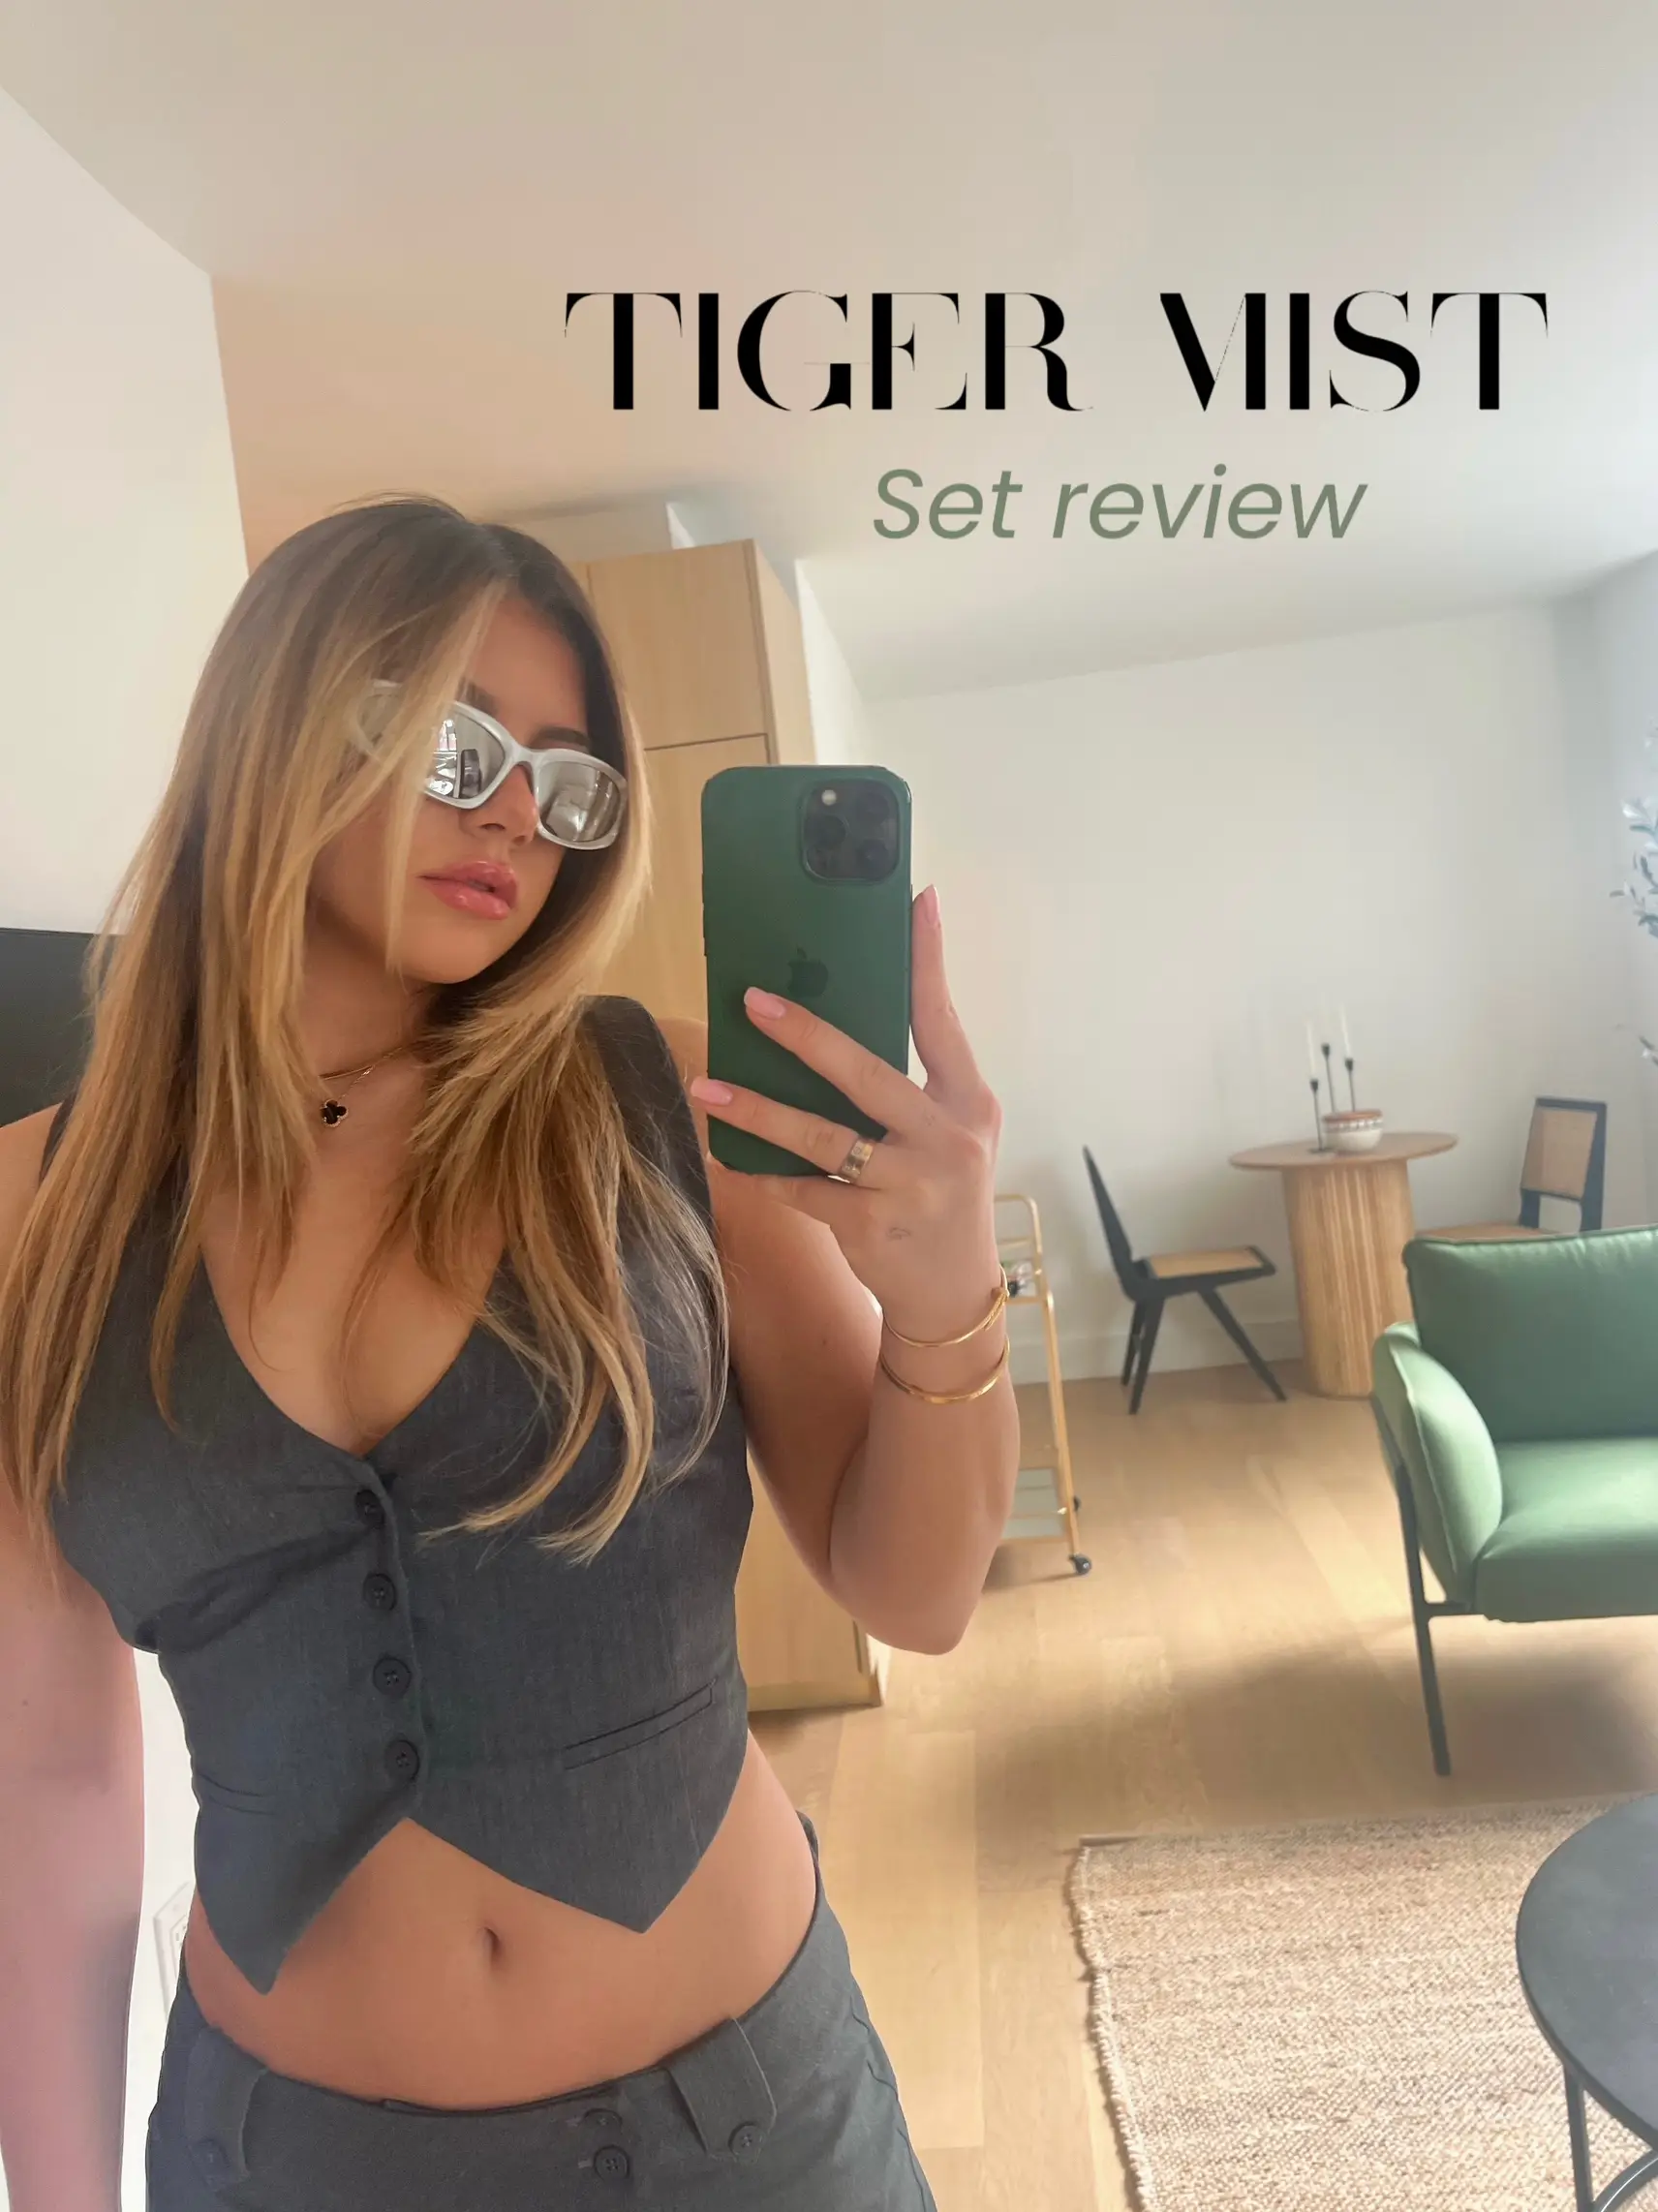 Tiger Mist set review, Gallery posted by Kayleeaquinn